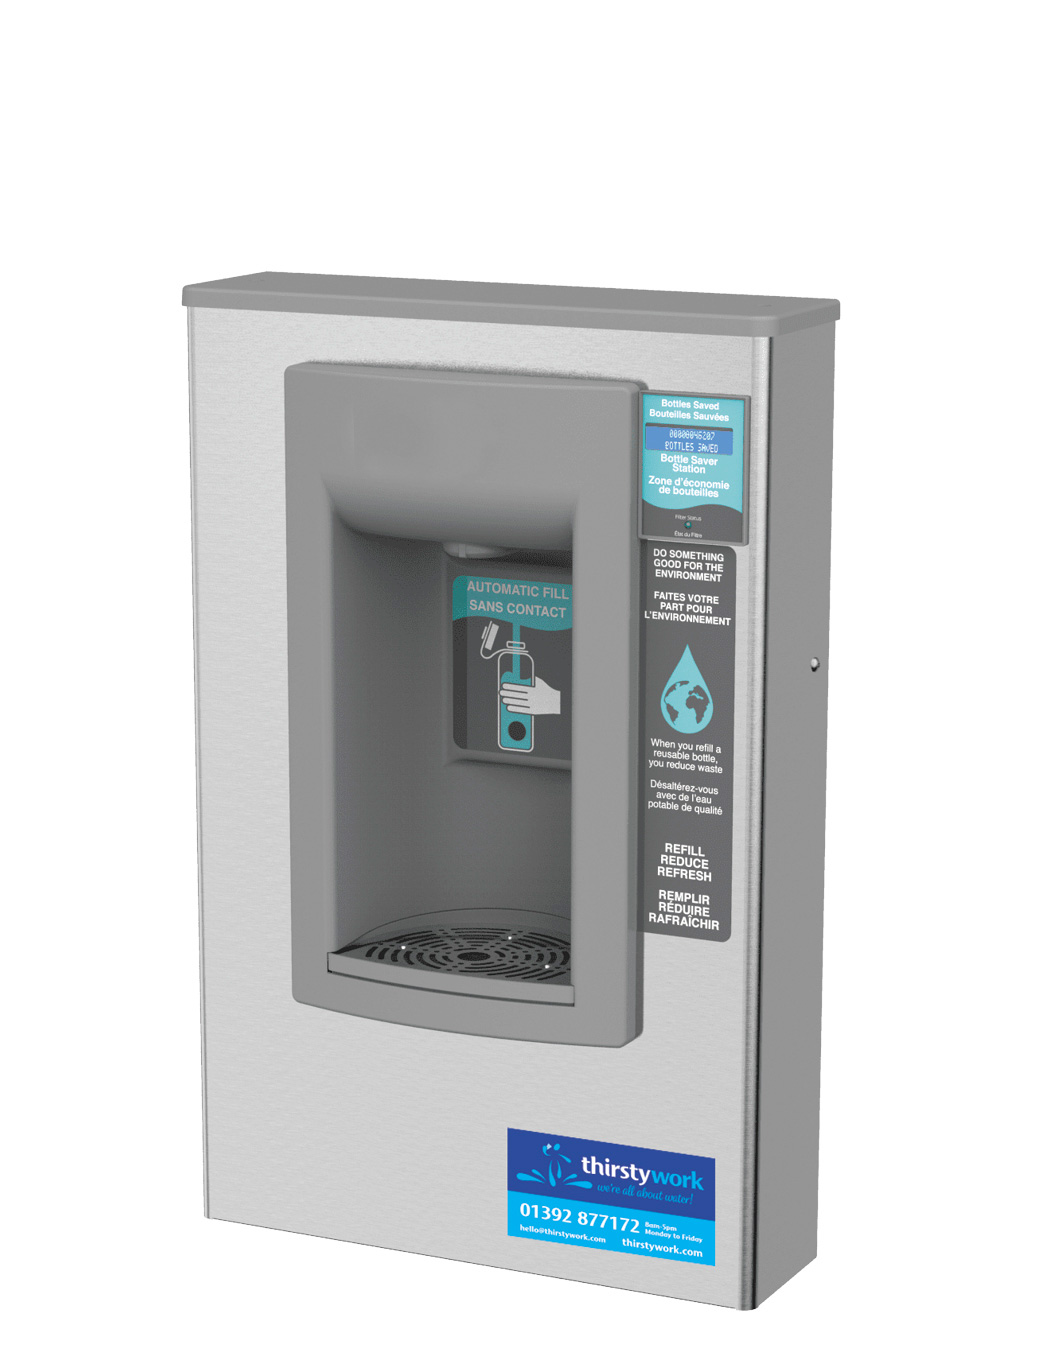 Aquapointe ambient bottle filler rental for universities